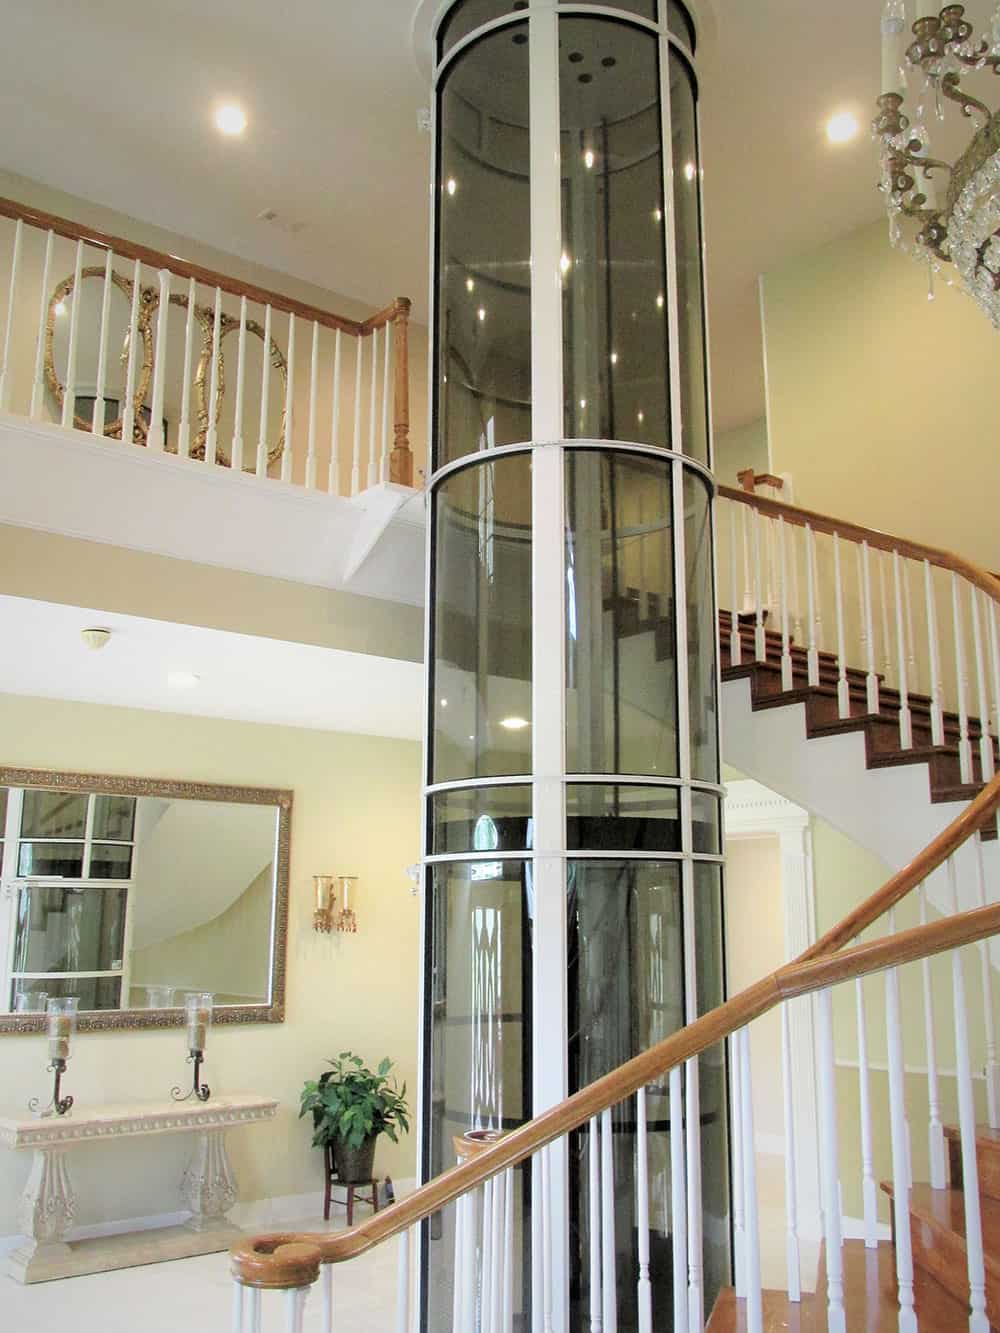 pneumatic vacuum elevator installed in the center of a winding staircase in a home